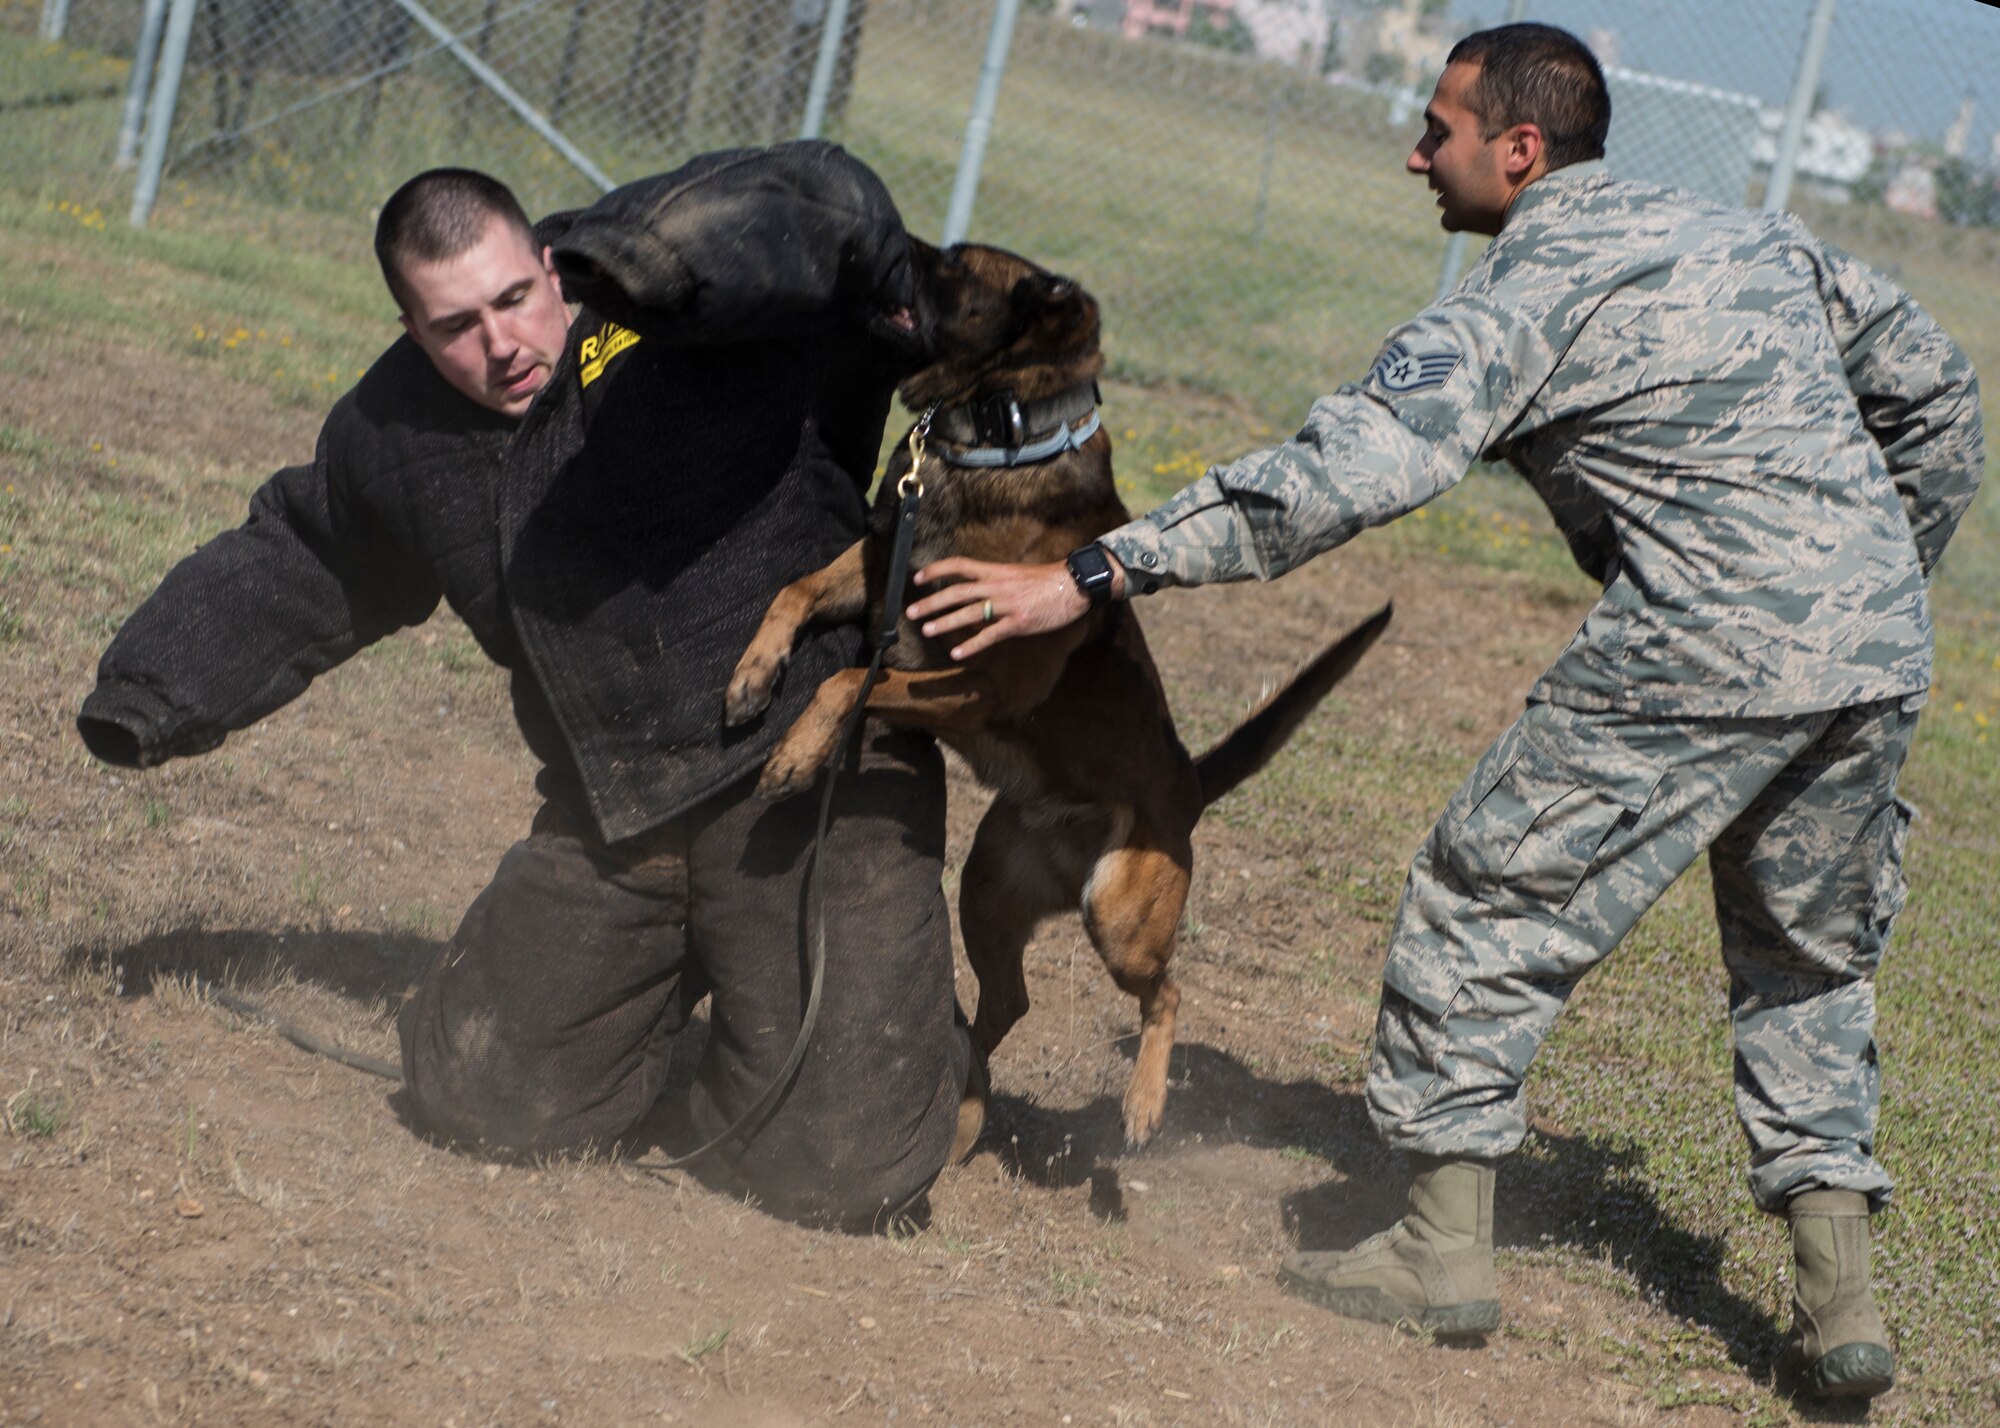 INCIRLIK AIR BASE, Turkey – U.S. Army Capt. James Gaffney, 39th Air Base Wing veterinarian, participates in a controlled aggression tactic demonstration with U.S. Air Force military dog Buck, assigned to the 39th Security Forces Squadron at Incirlik Air Base, Turkey, June 8, 2018.